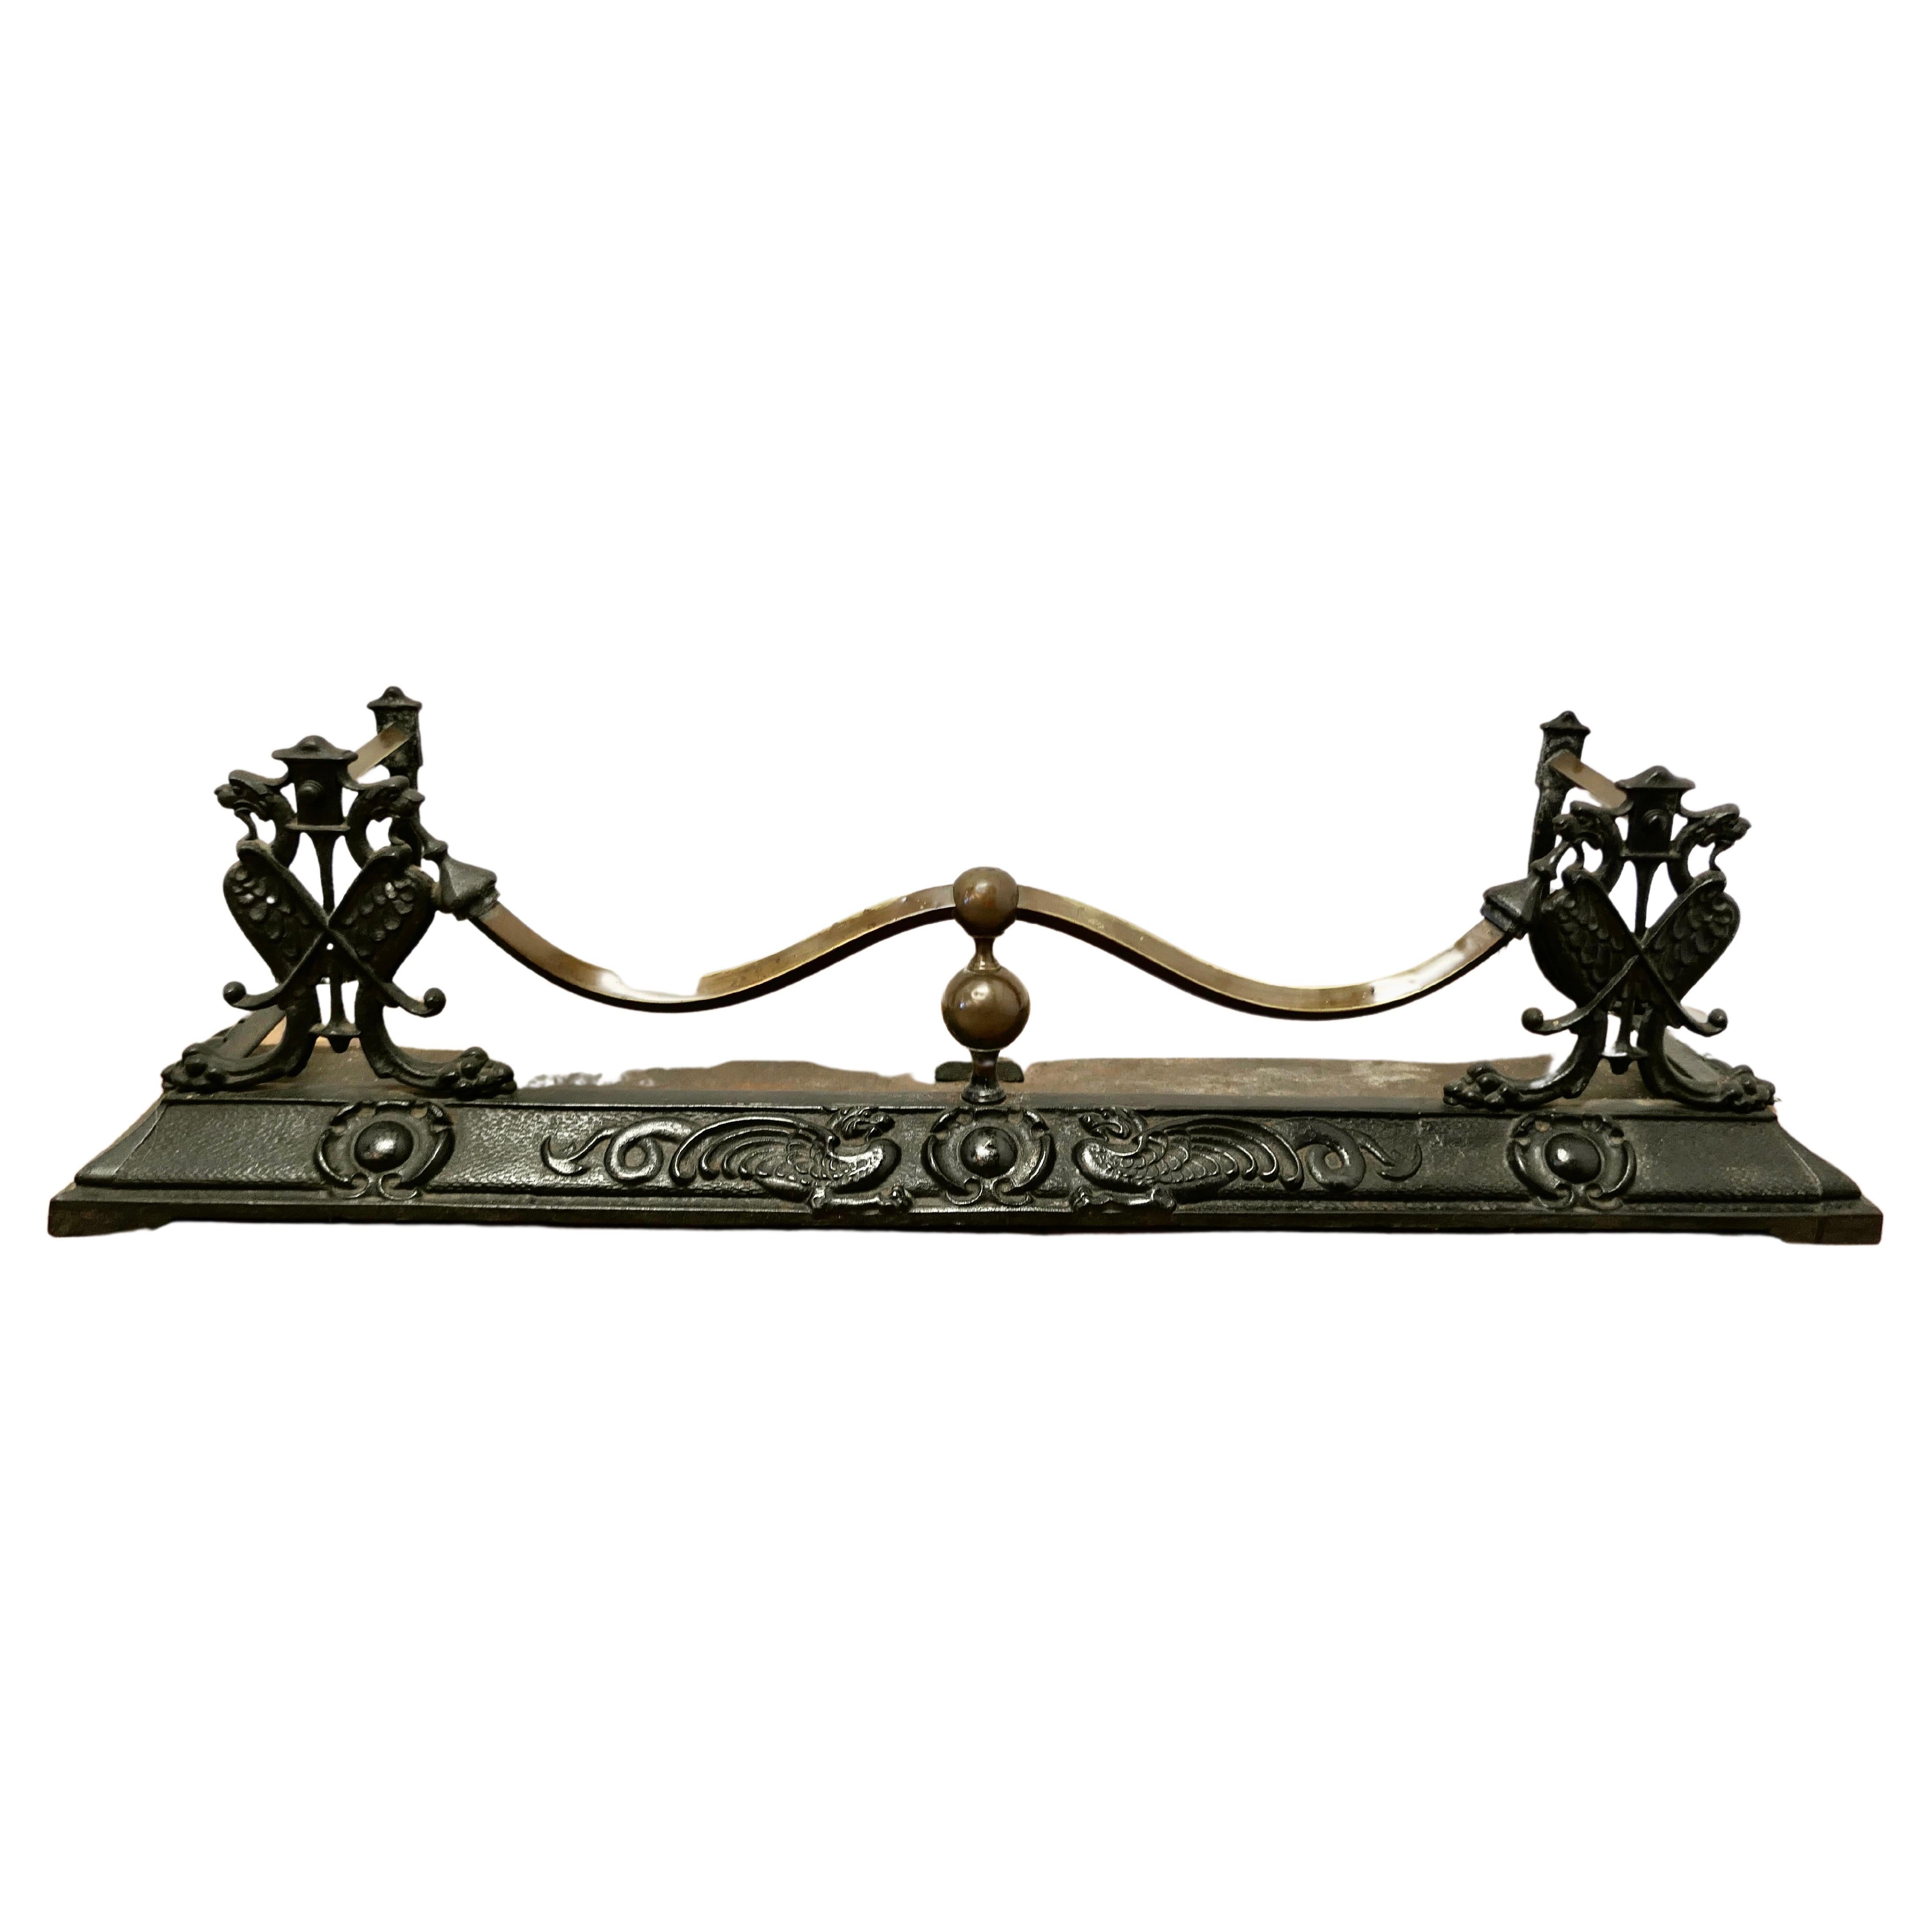 Victorian Art Nouveau Cast Iron and Brass Fender This is Beautifully Designed